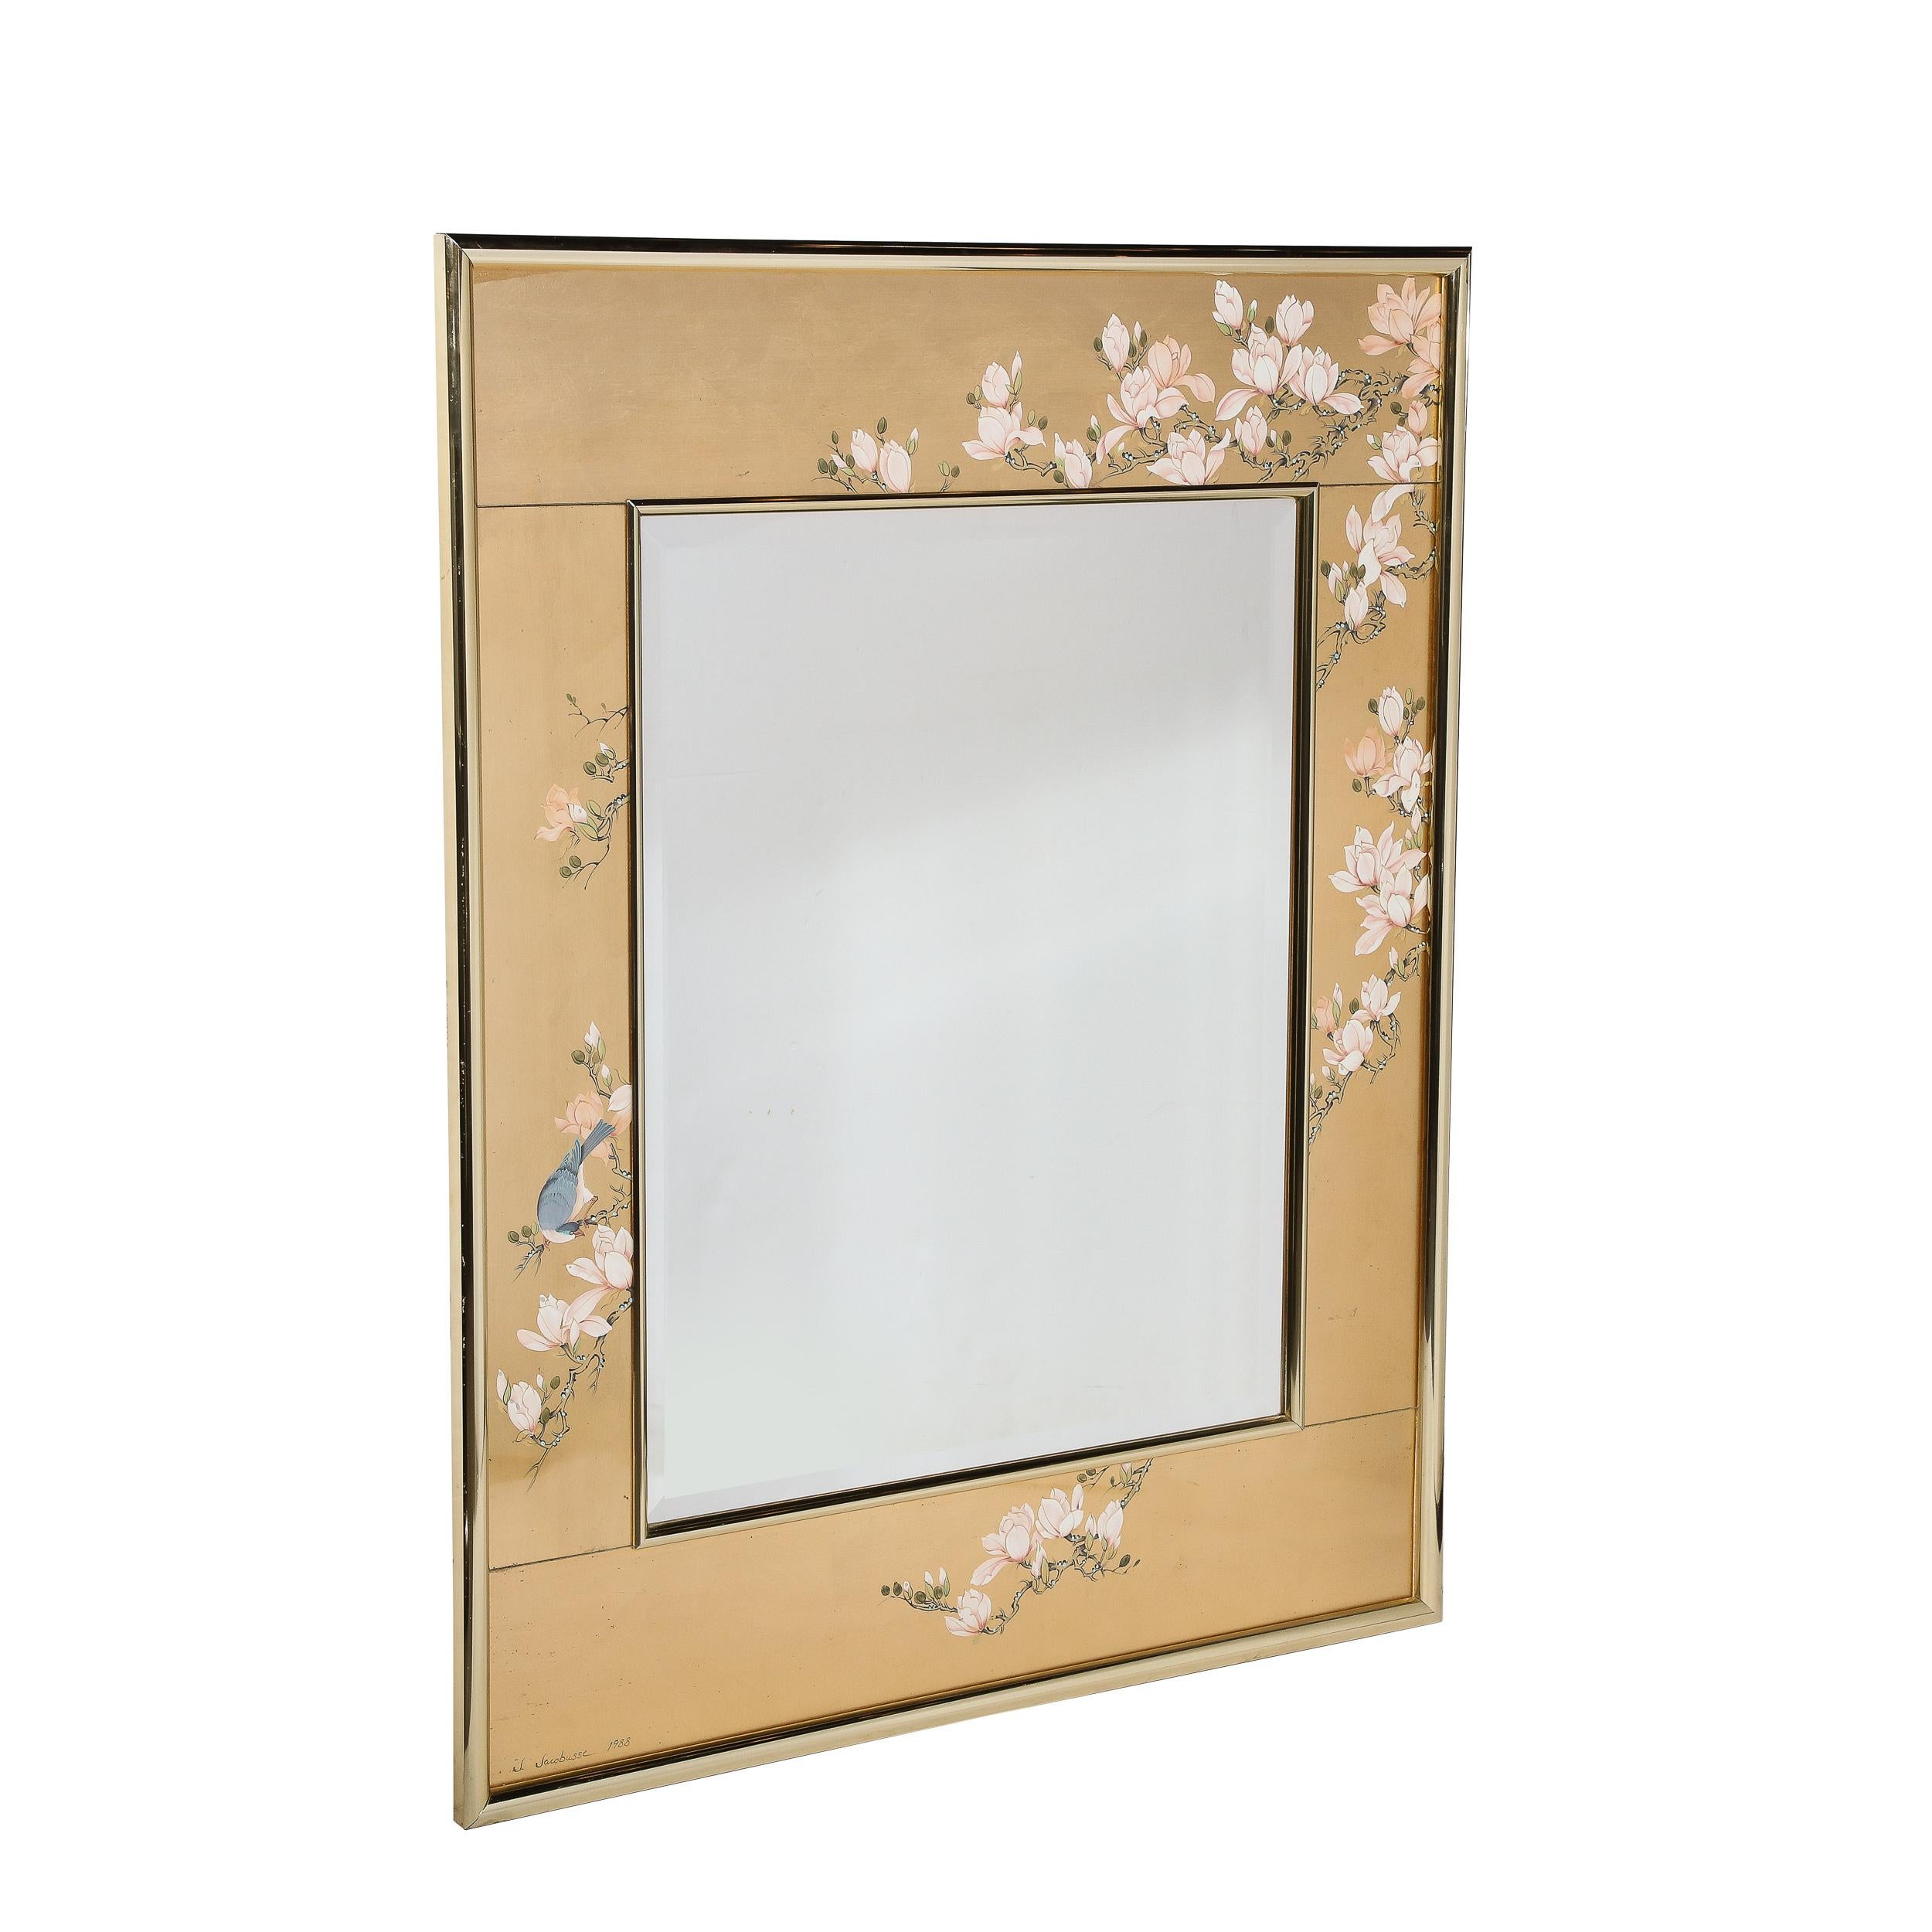 This stunning Mid-Century Modernist Labarge Mirror in Gilt Eglomise and Brass signed J. Jacobusse originates from the United States in 1988. A beautiful example of it exquisite craftsmanship glamorous use of materials, this mirror features a